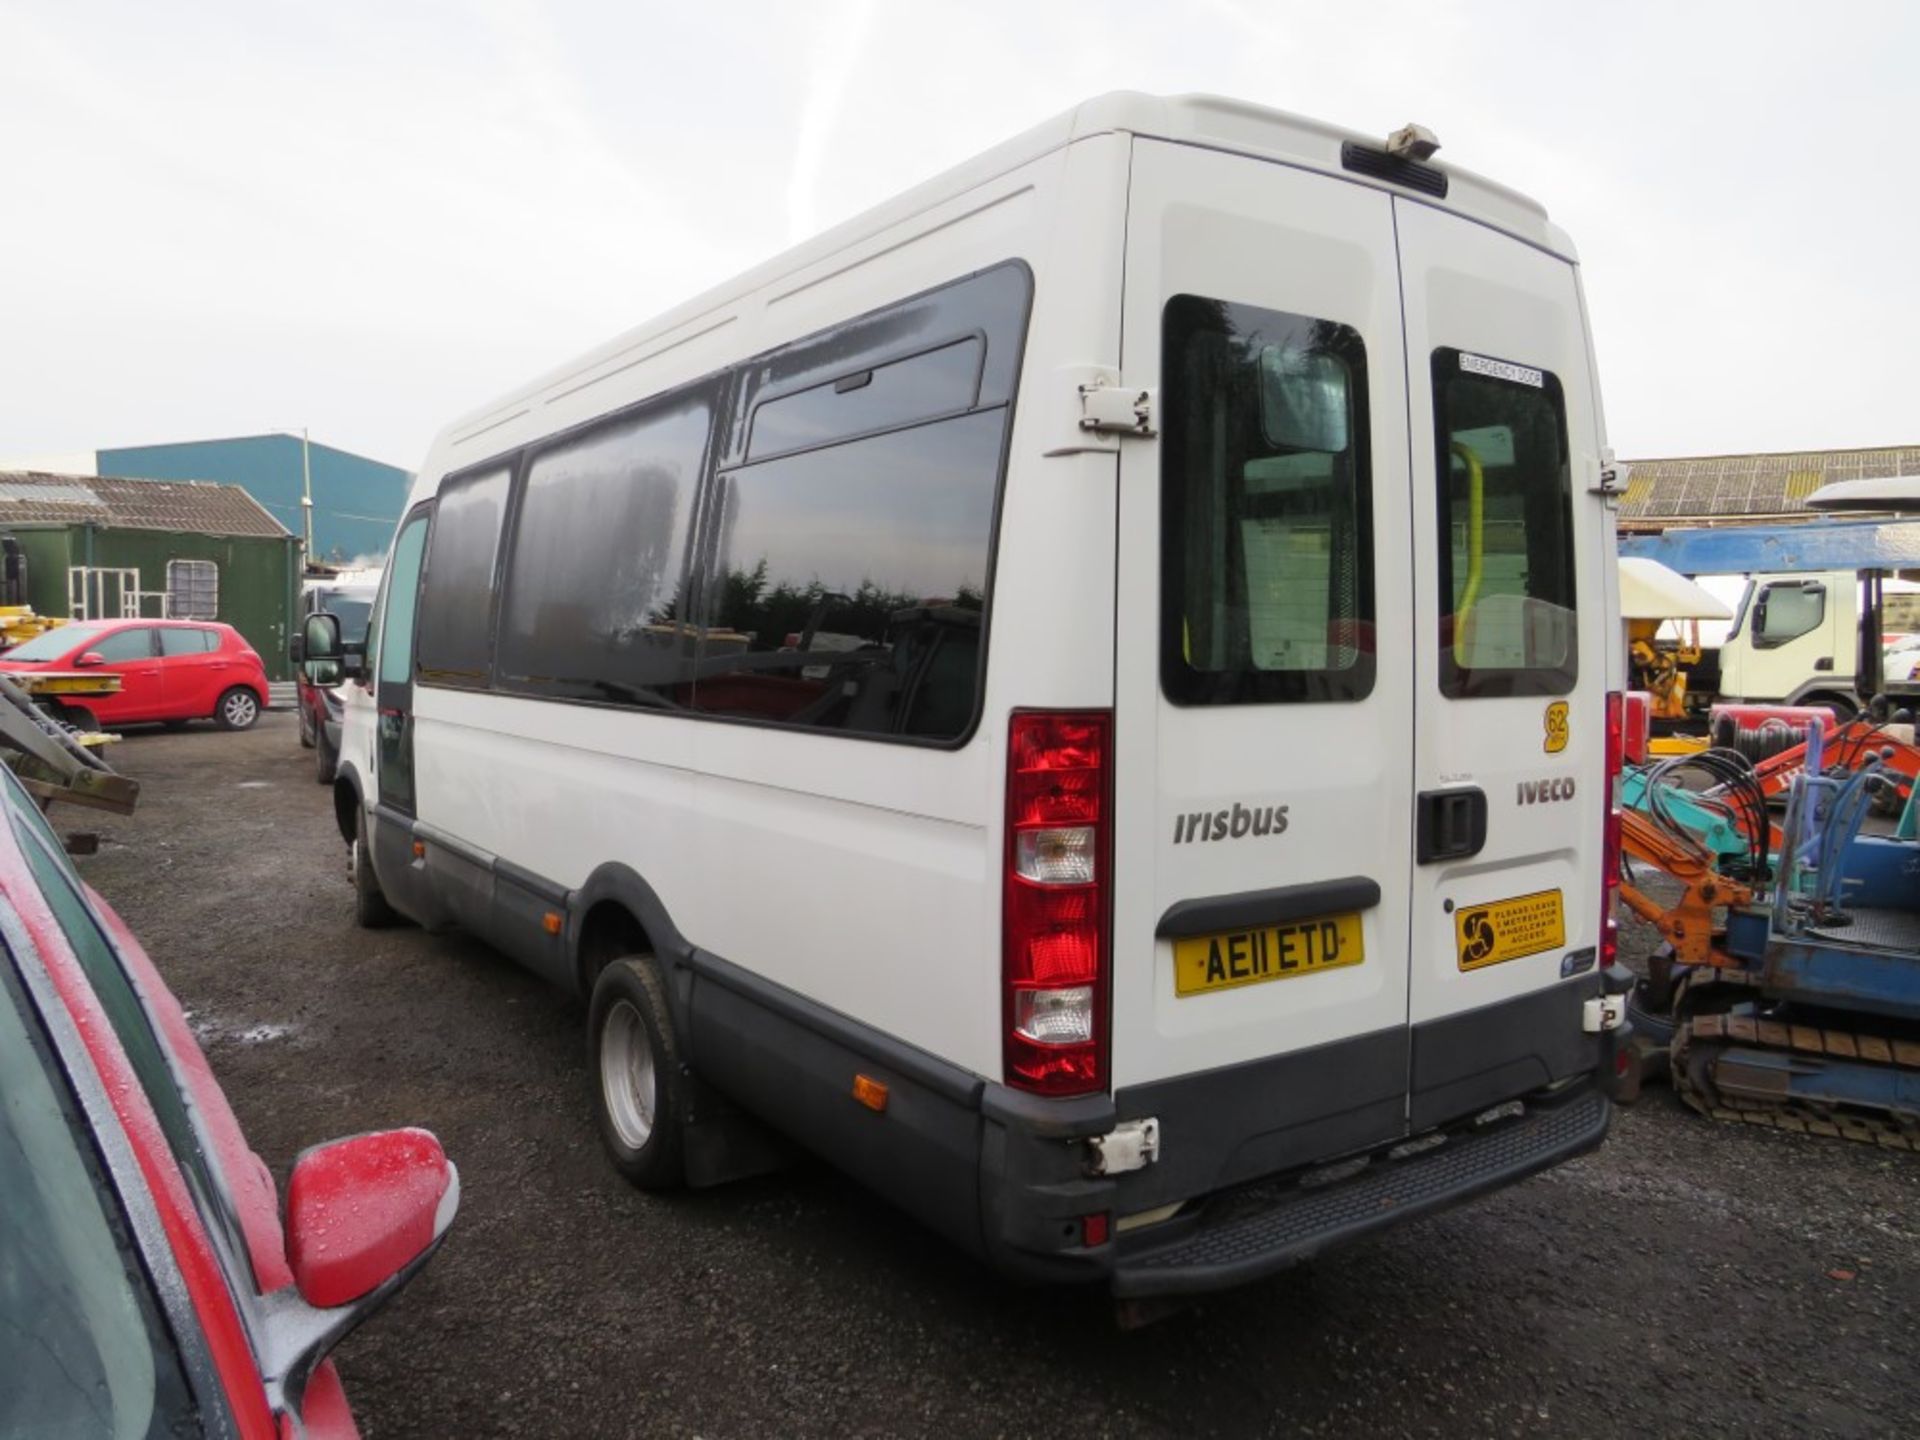 11 reg IVECO DAILY 50C17 IRIS BUS, 1ST REG 04/11, 74493M WARRANTED, WHEEL CHAIR LIFT, V5 HERE, 1 - Image 3 of 7